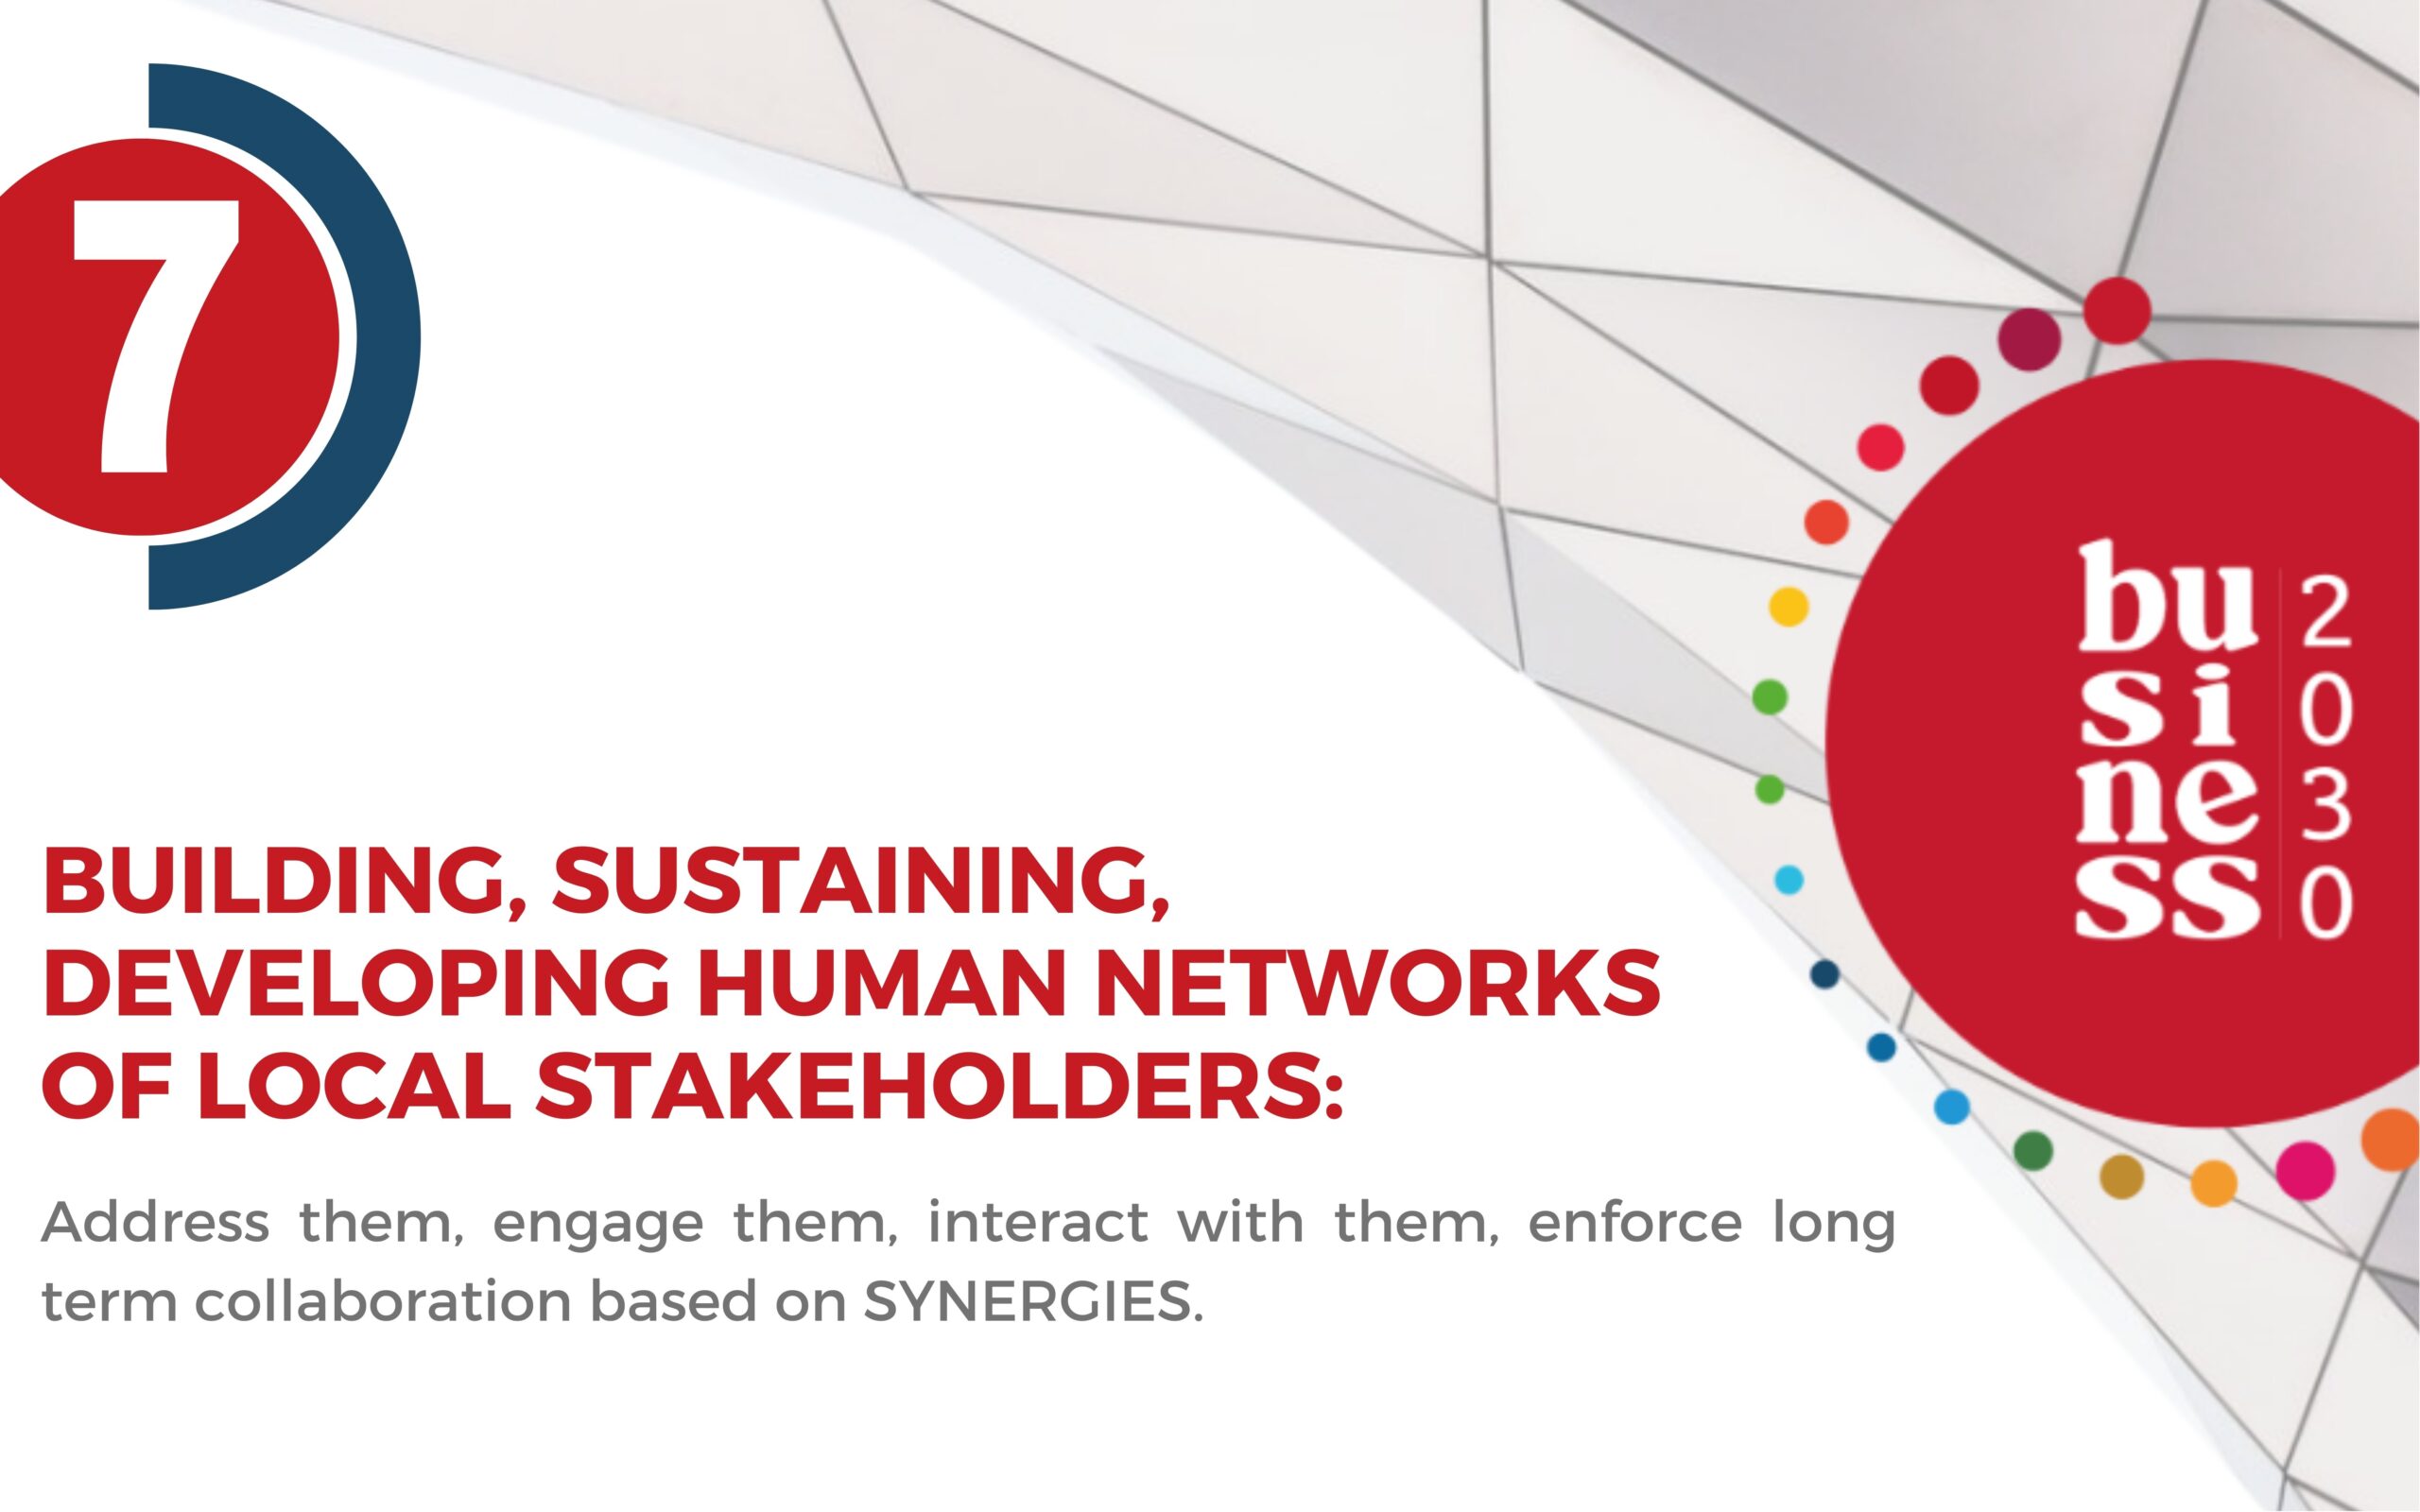 7. Building, sustaining, developing human networks of local stakeholders